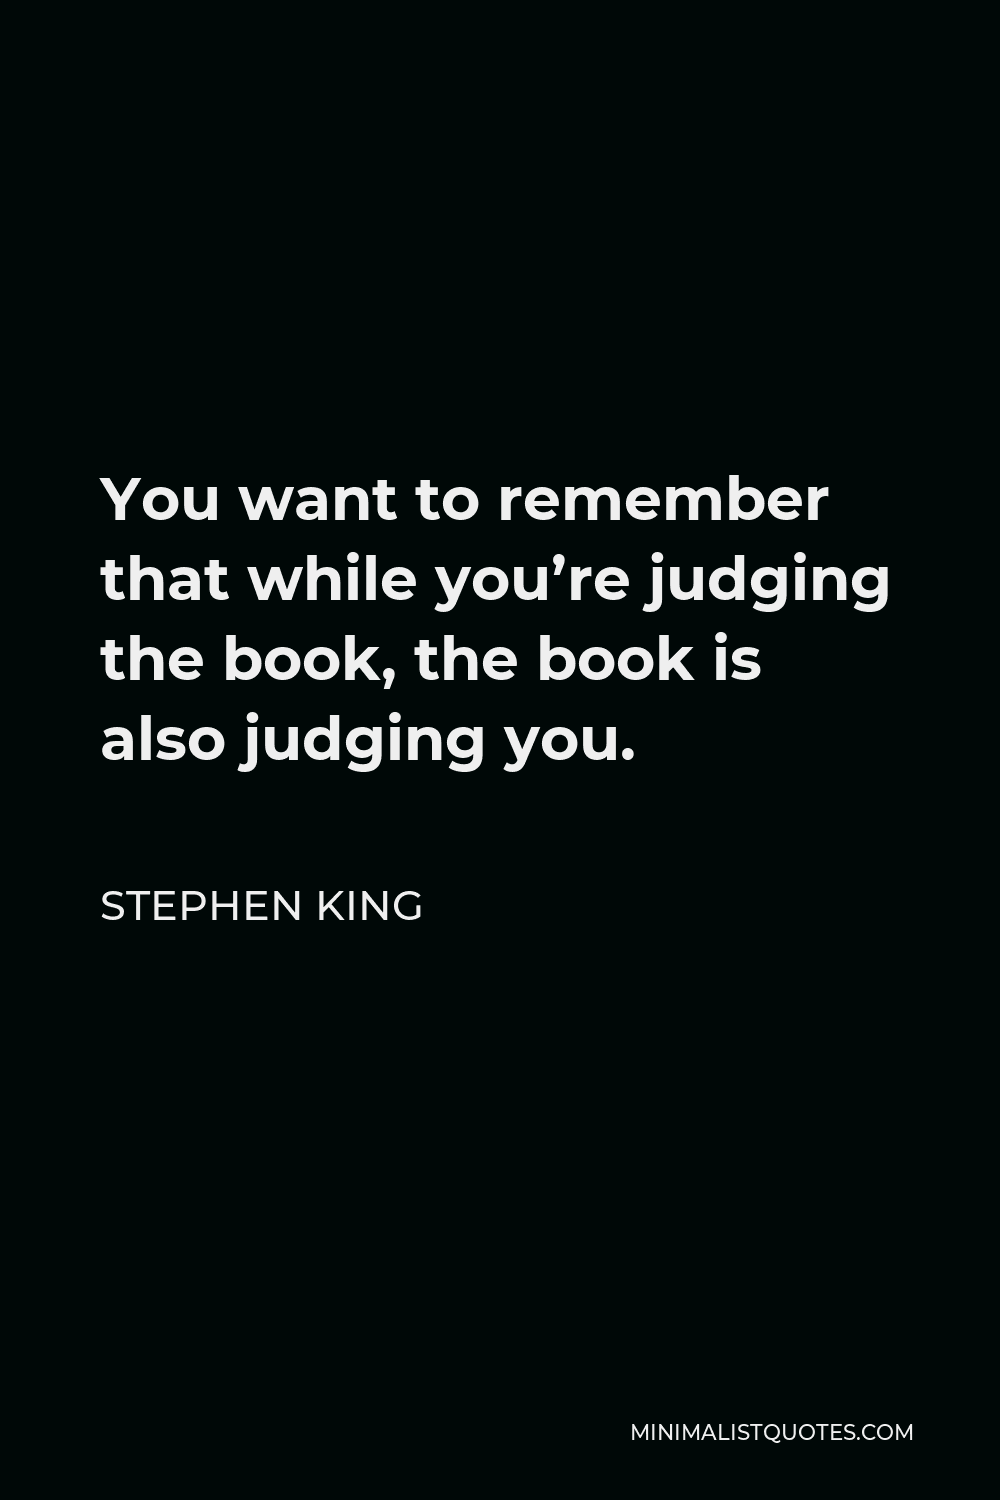 Stephen King Quote - You want to remember that while you’re judging the book, the book is also judging you.